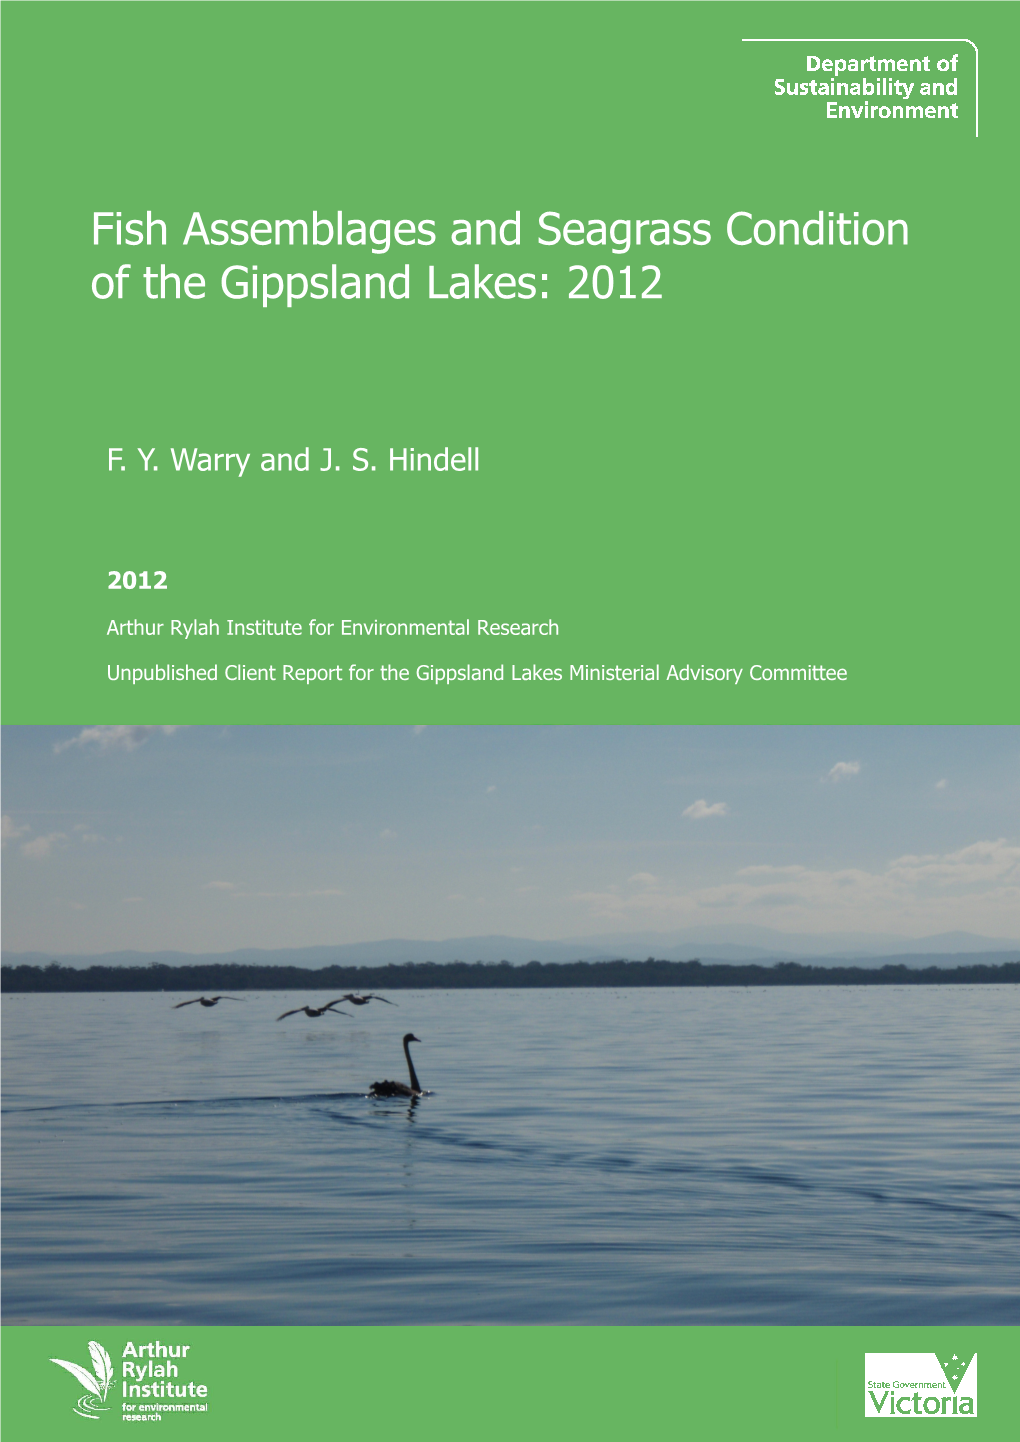 Fish Assemblages and Seagrass Condition of the Gippsland Lakes: 2012